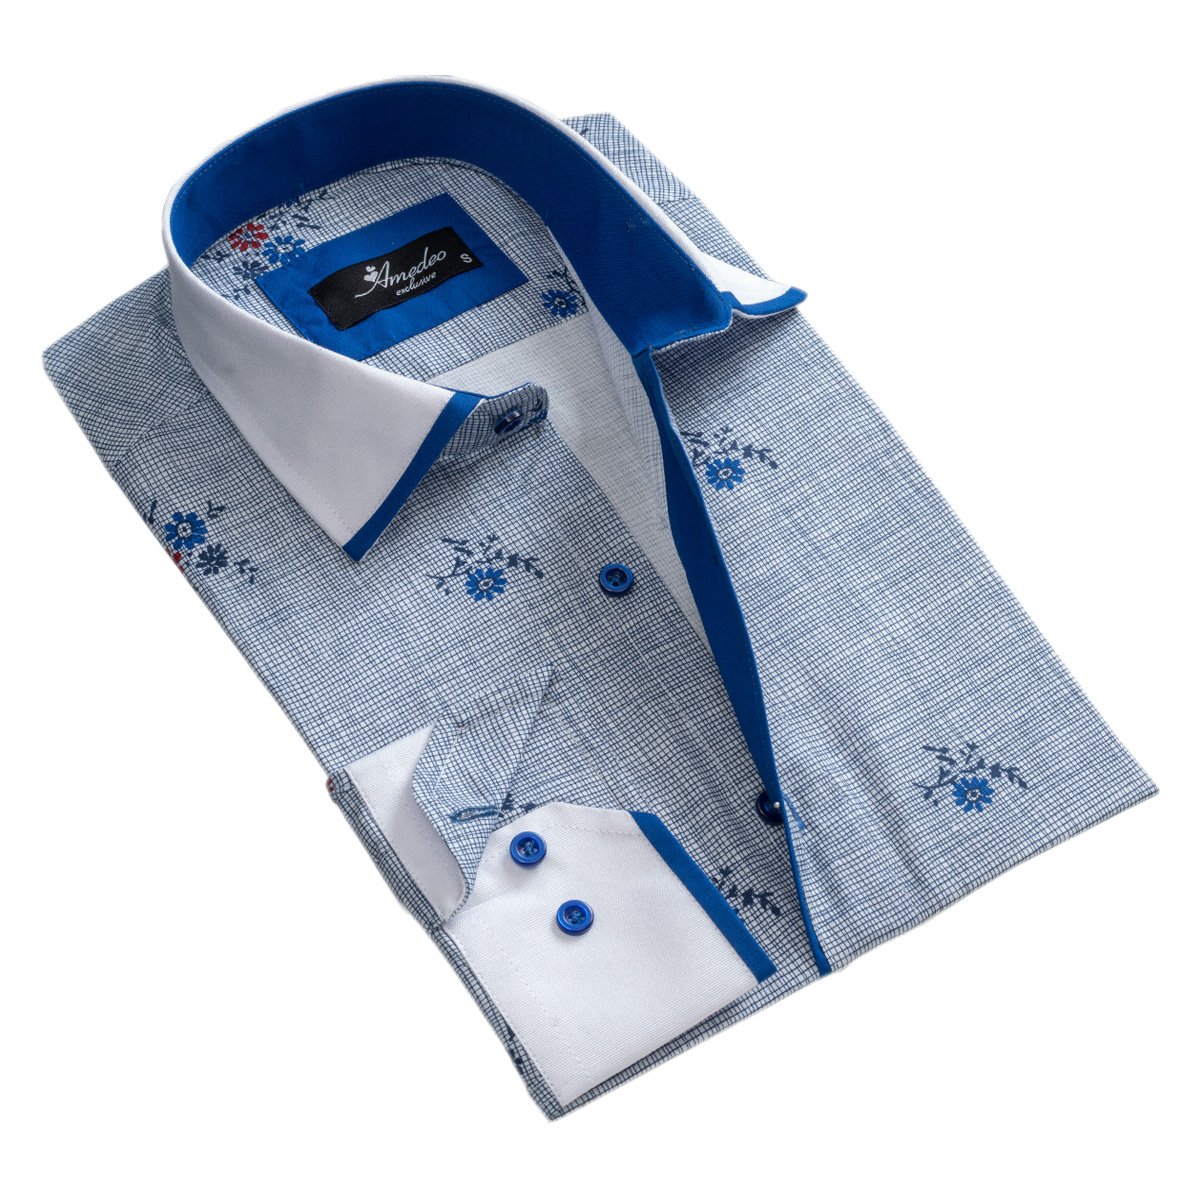 Light Sky Blue Floral Mens Slim Fit Designer Dress Shirt - tailored Cotton Shirts for Work and Casual Wear - Amedeo Exclusive